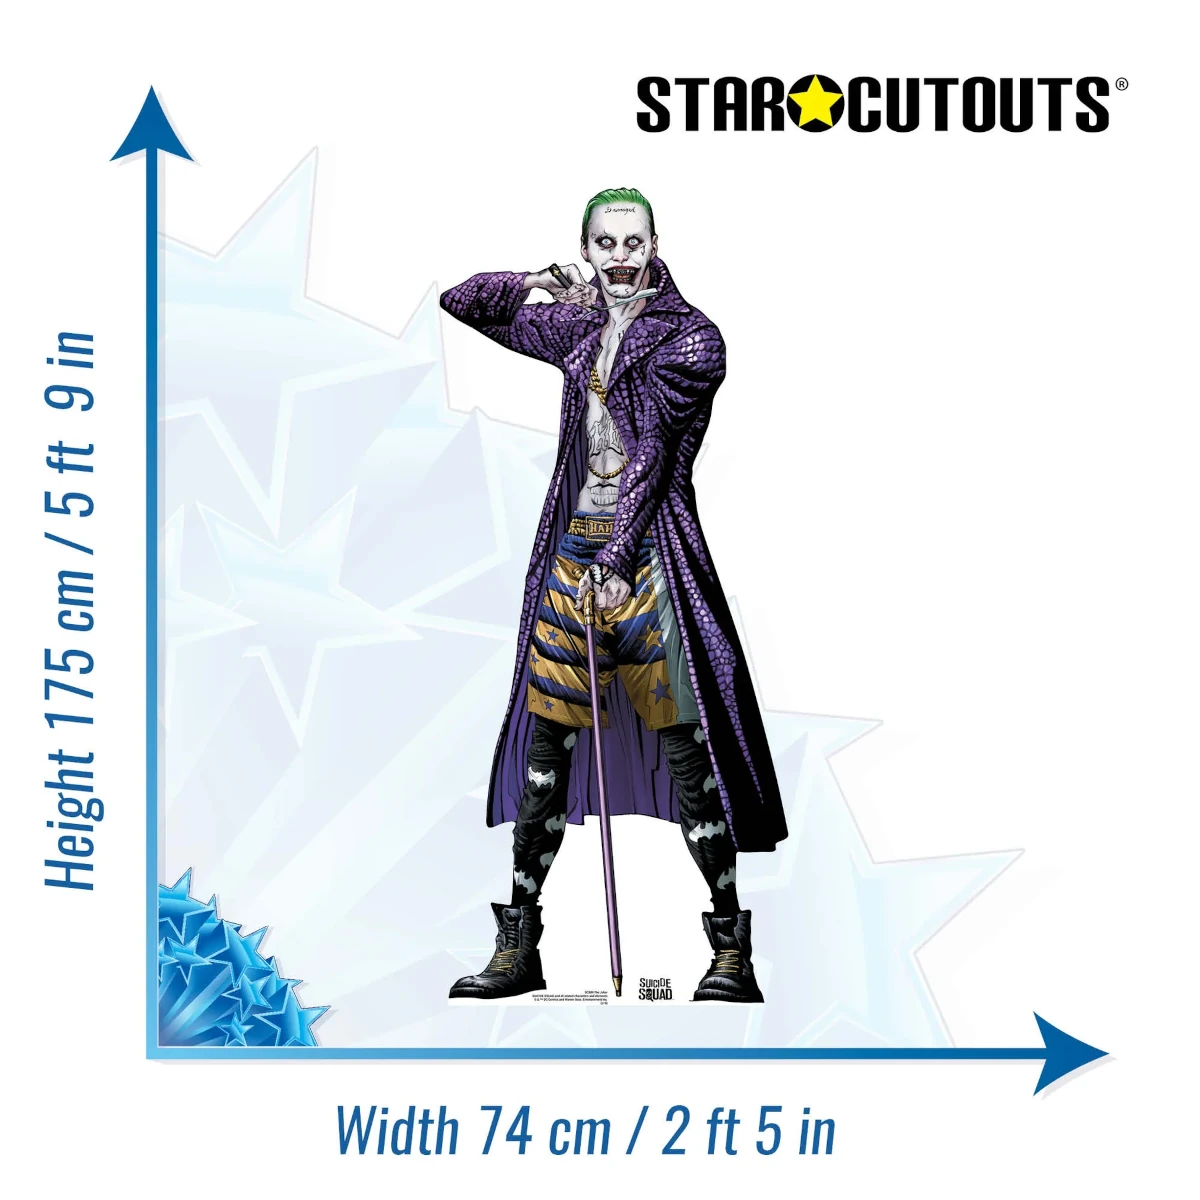 SC889 The Joker 'Comic Art' (Suicide Squad) Official Lifesize Cardboard Cutout Standee Size